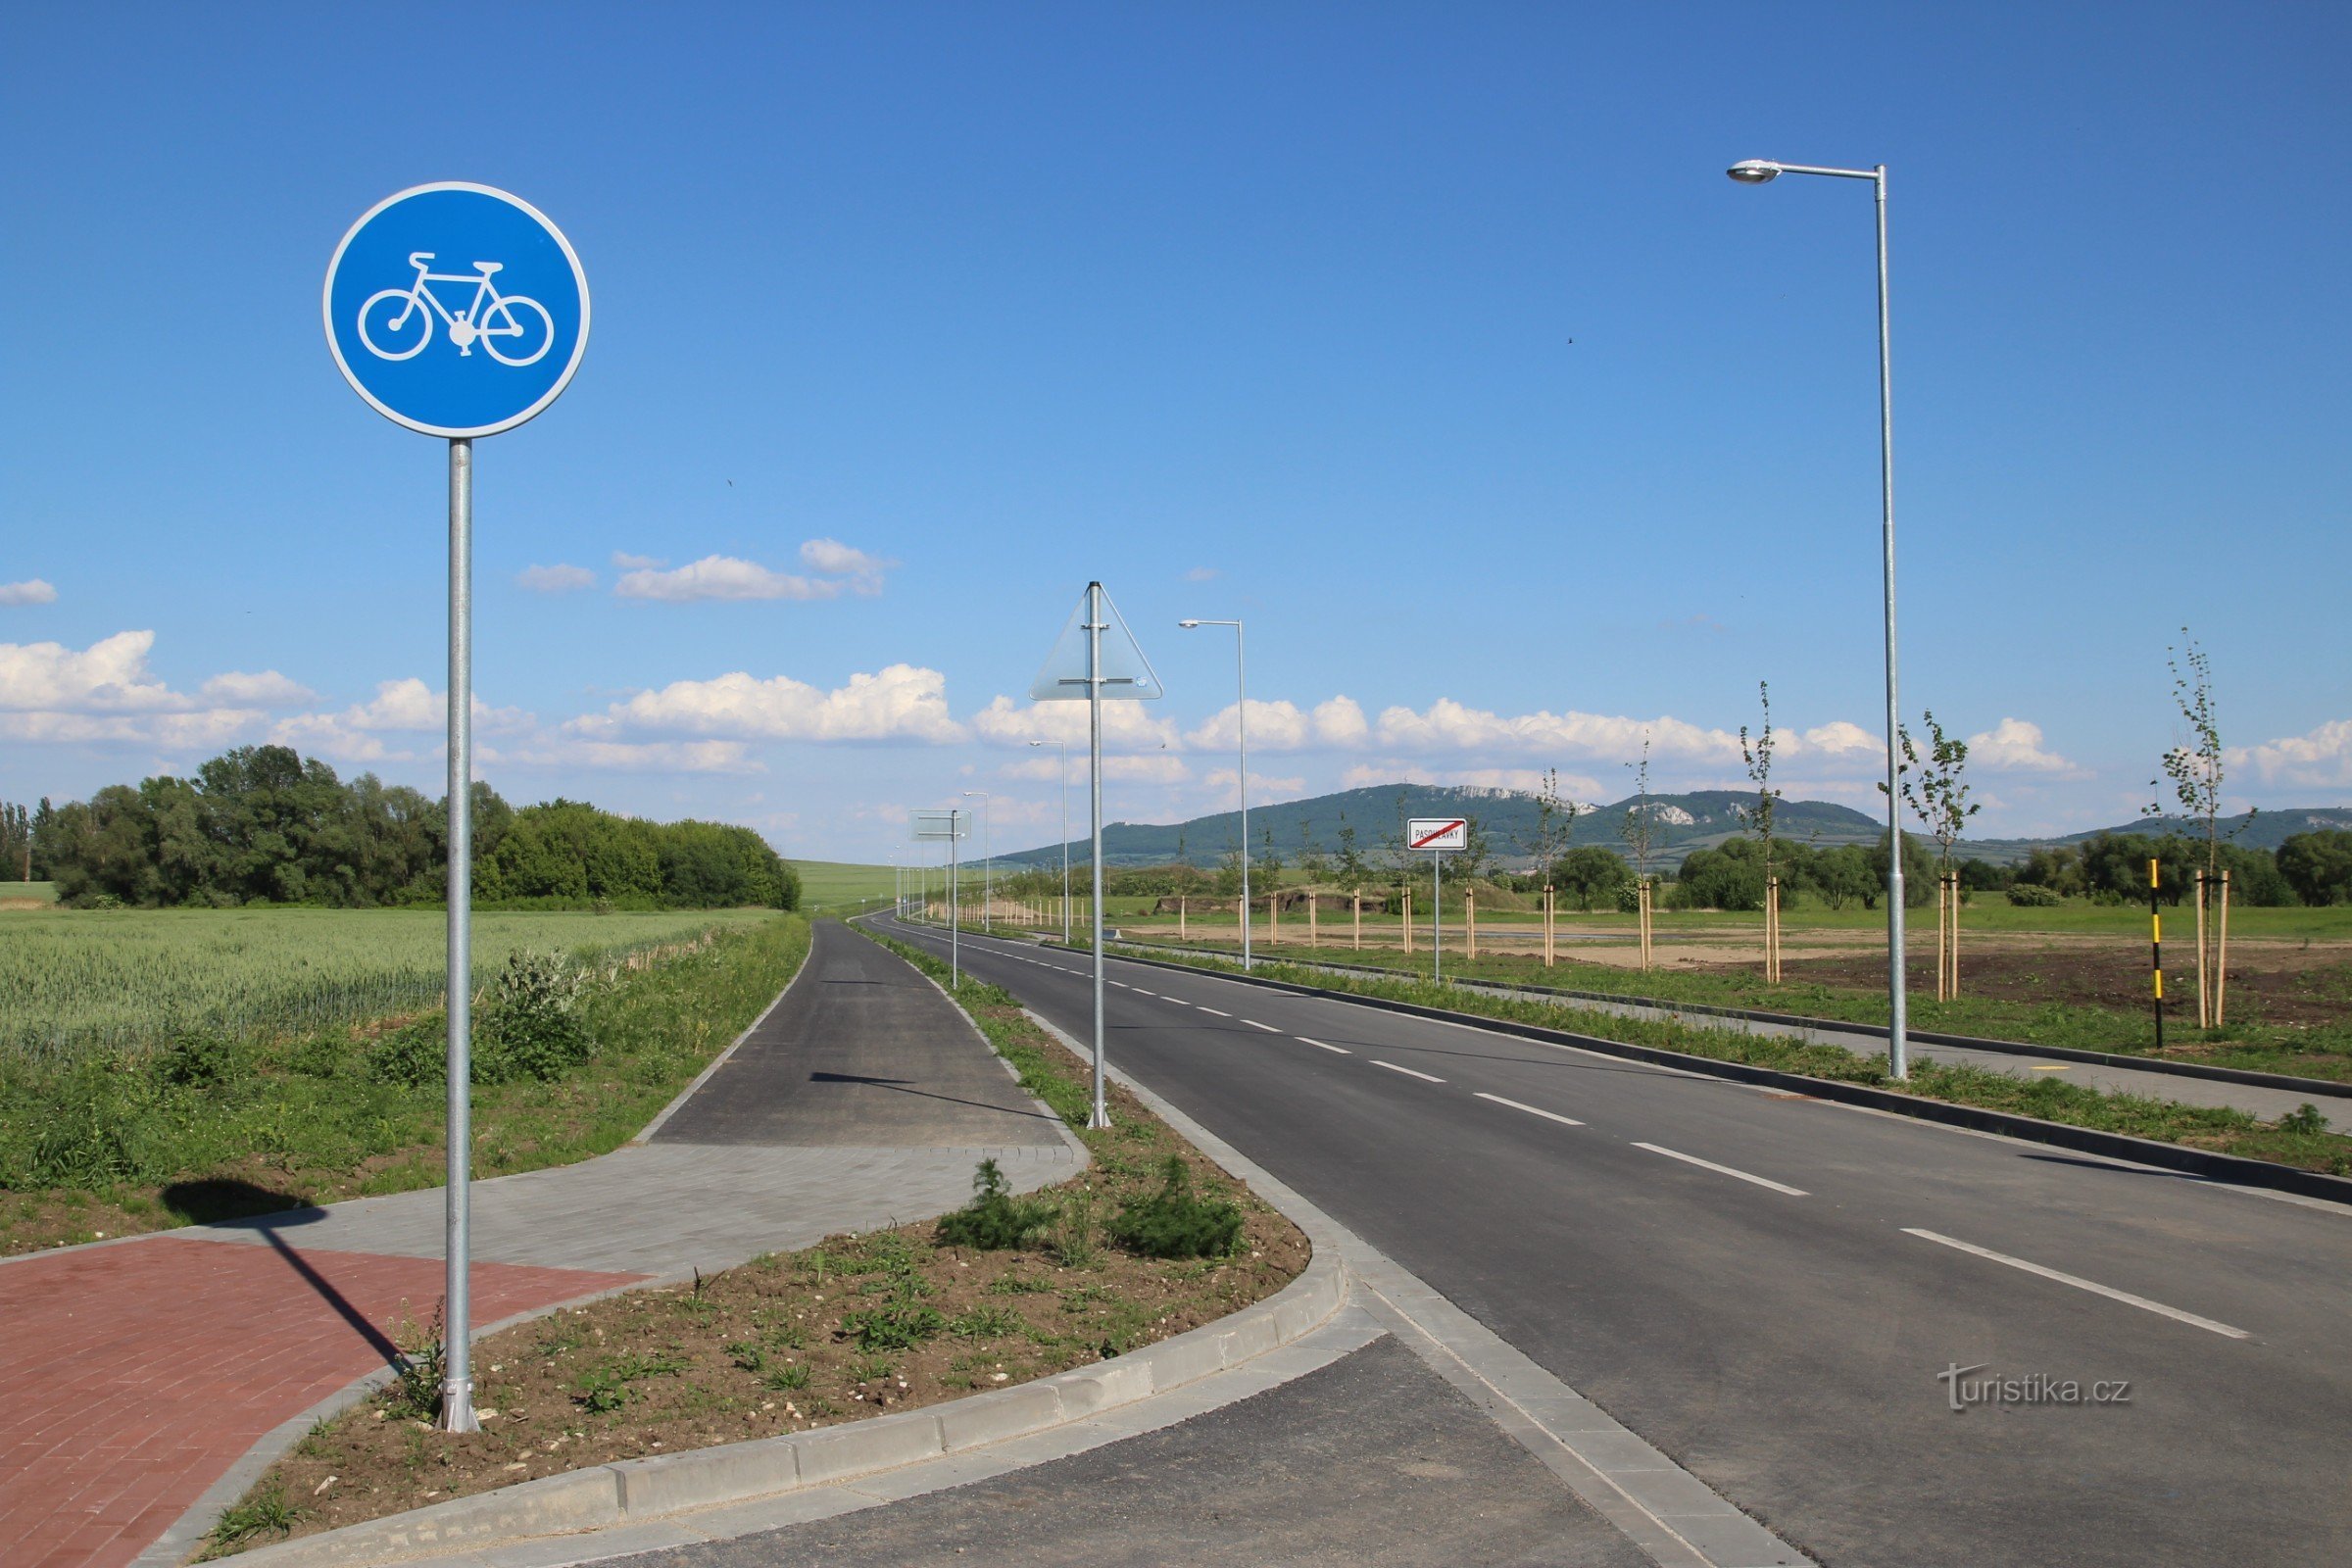 The cycle path begins at the end of the village